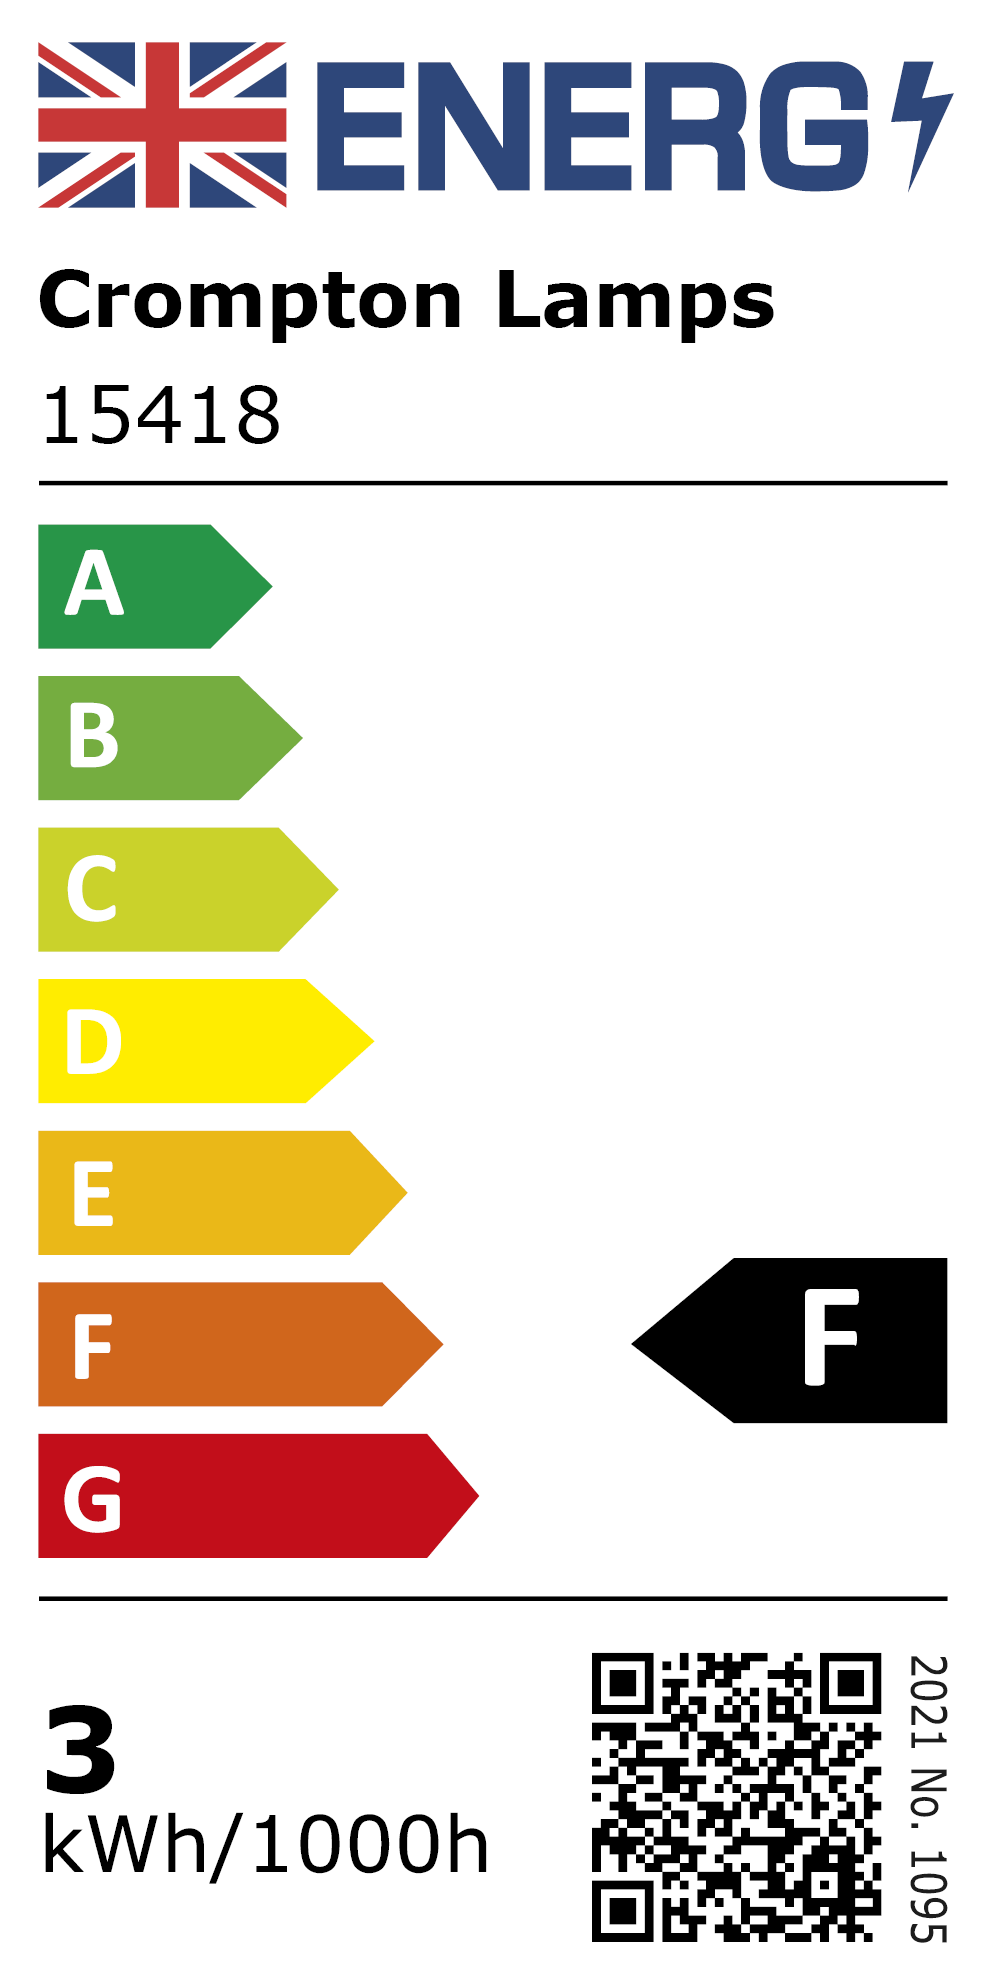 New 2021 Energy Rating Label: MPN 15418